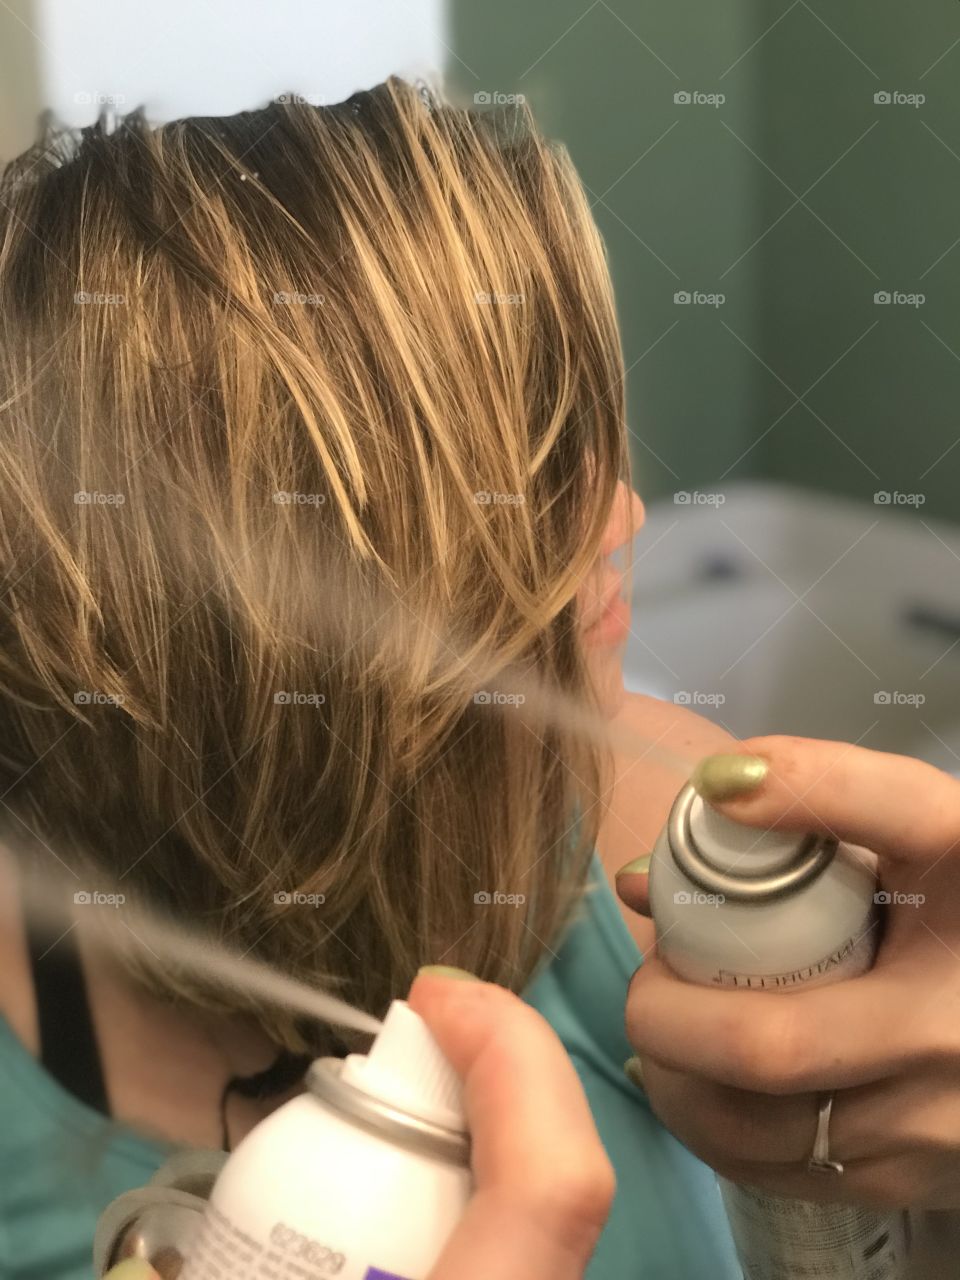 Woman fixing hair with spray in a bathroom getting ready for the day. 